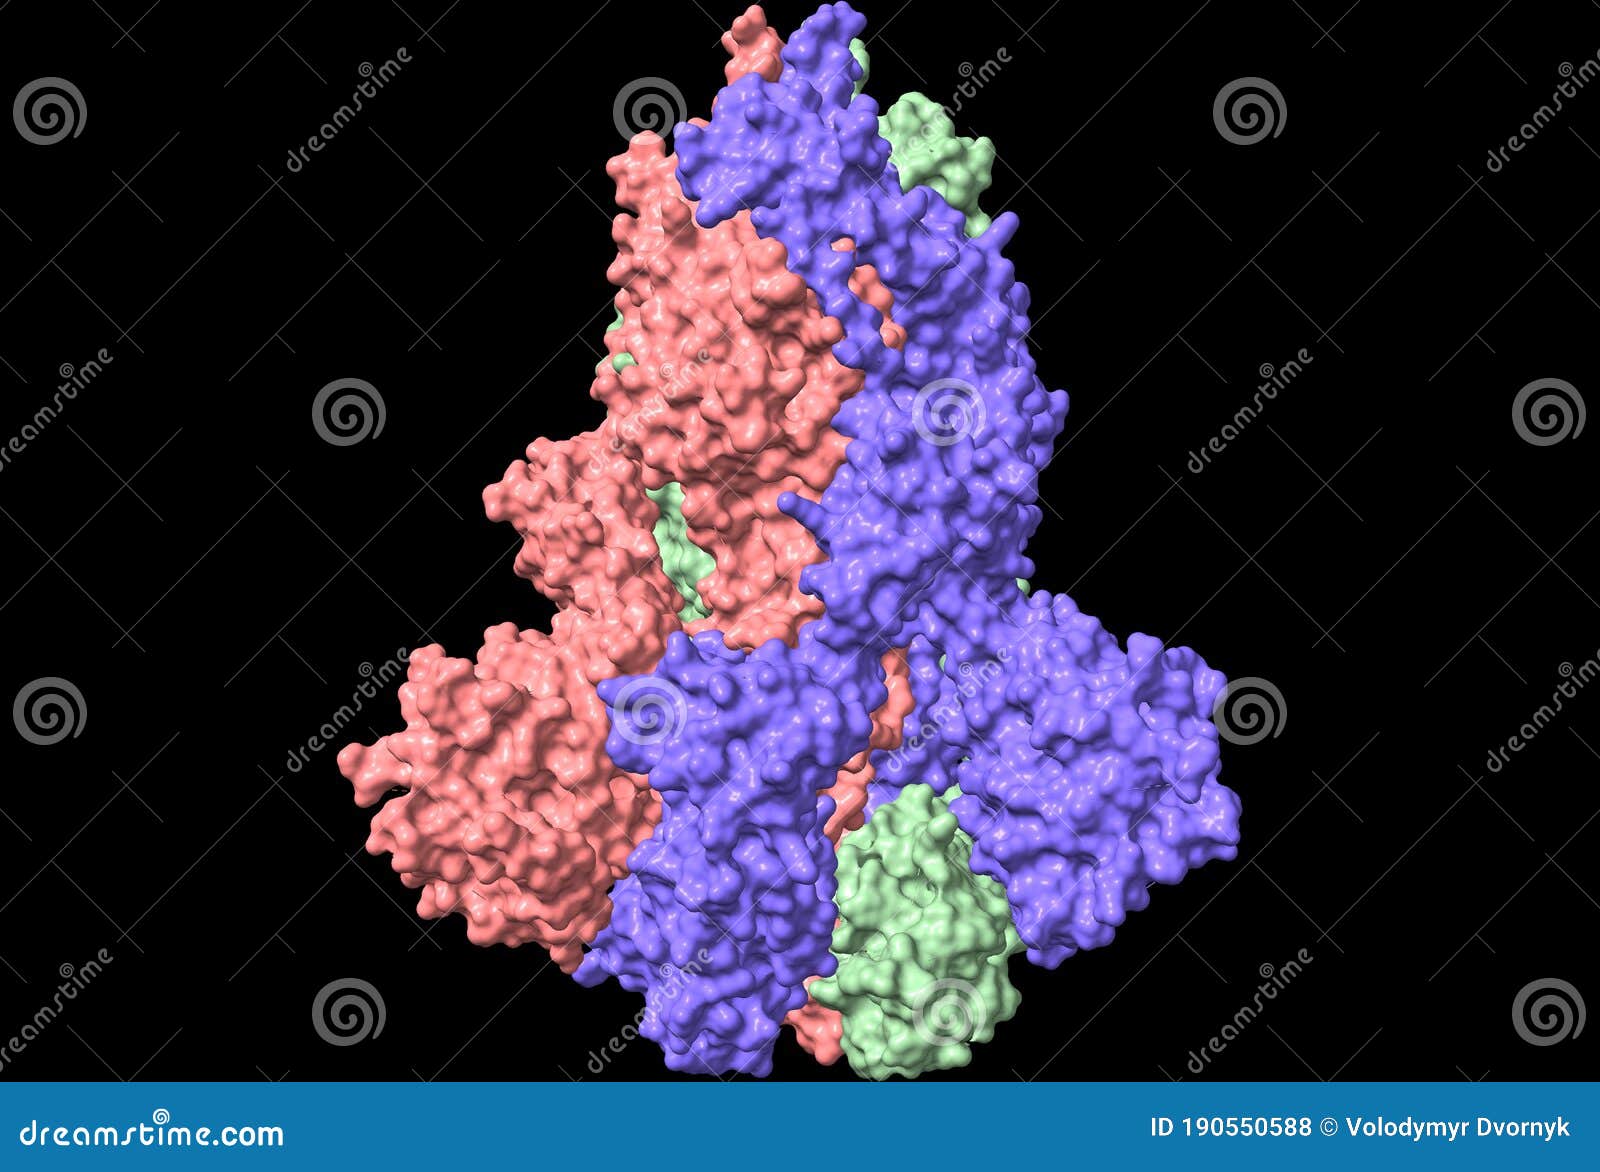 three-dimensional structure of the sars-cov-2 spike glycoprotein